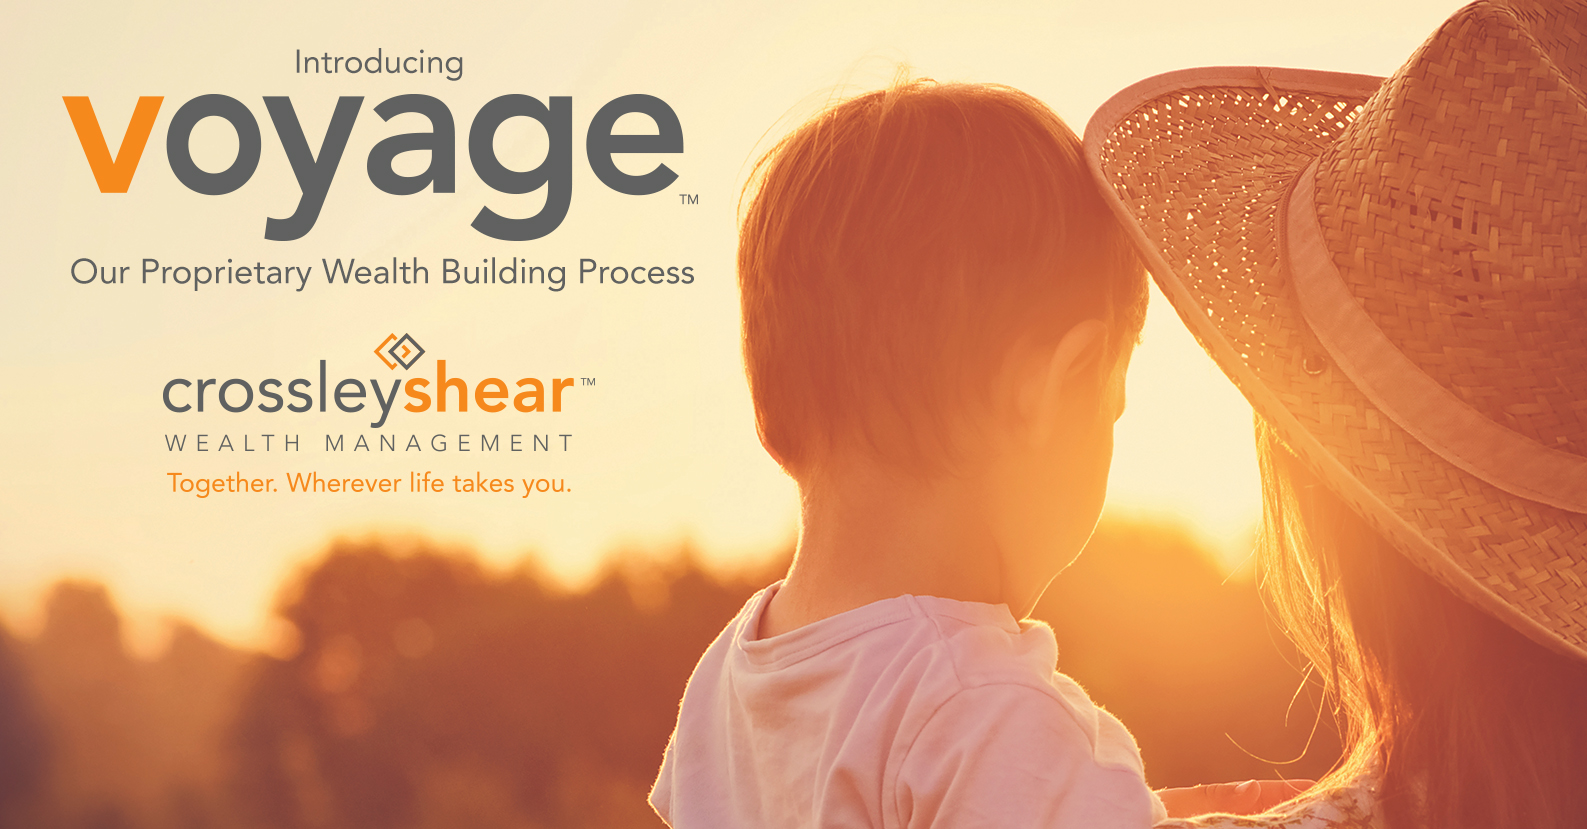 CrossleyShear Wealth Management Announces the Launch of Voyage